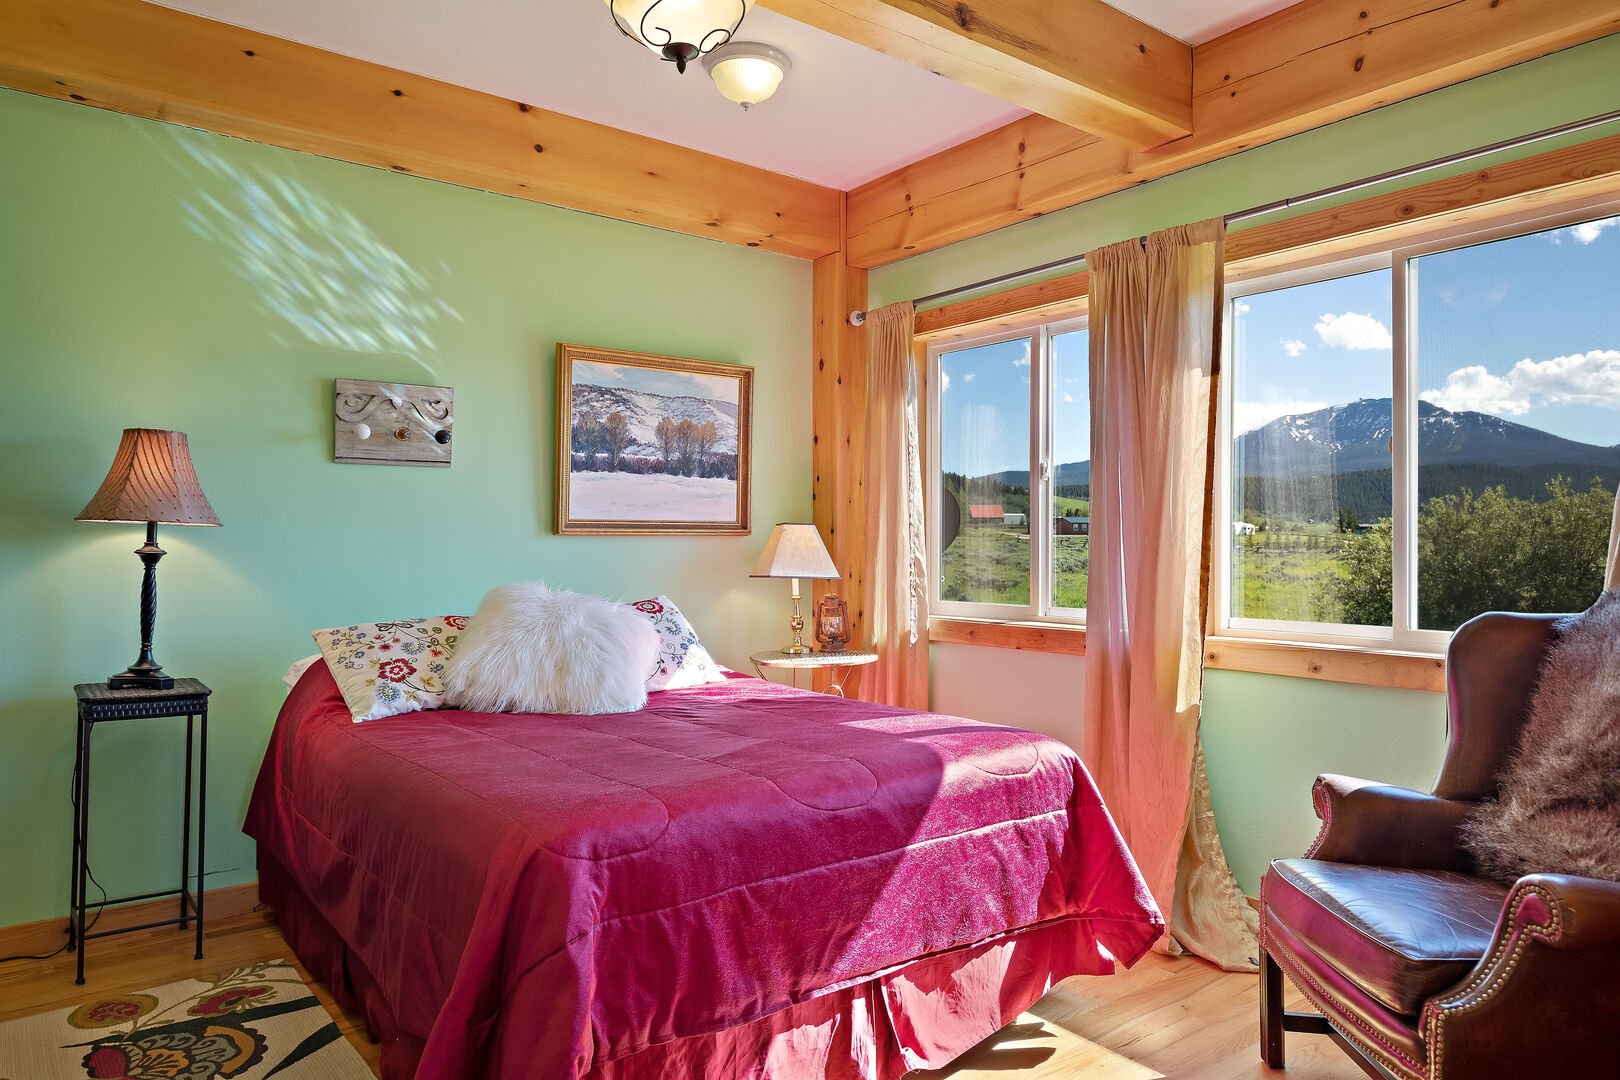 Henrys Lake Goose Bay ~ bedroom #1 on main level w/ queen bed and private access to shared bathroom